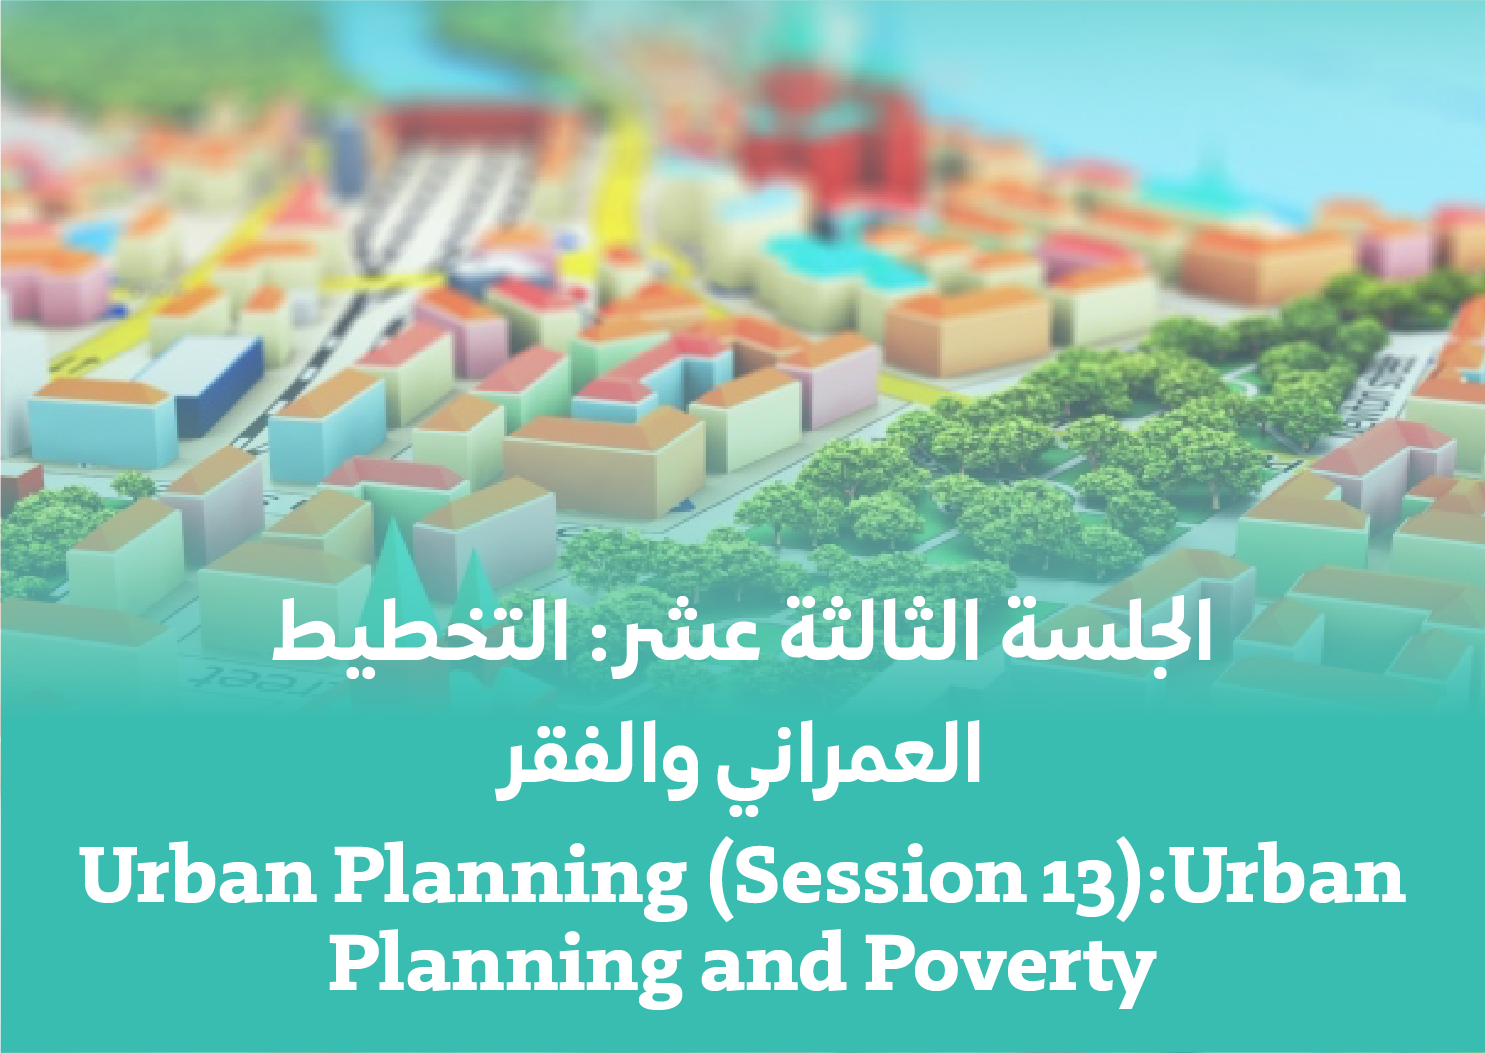 Session 13: Urban Planning and Poverty